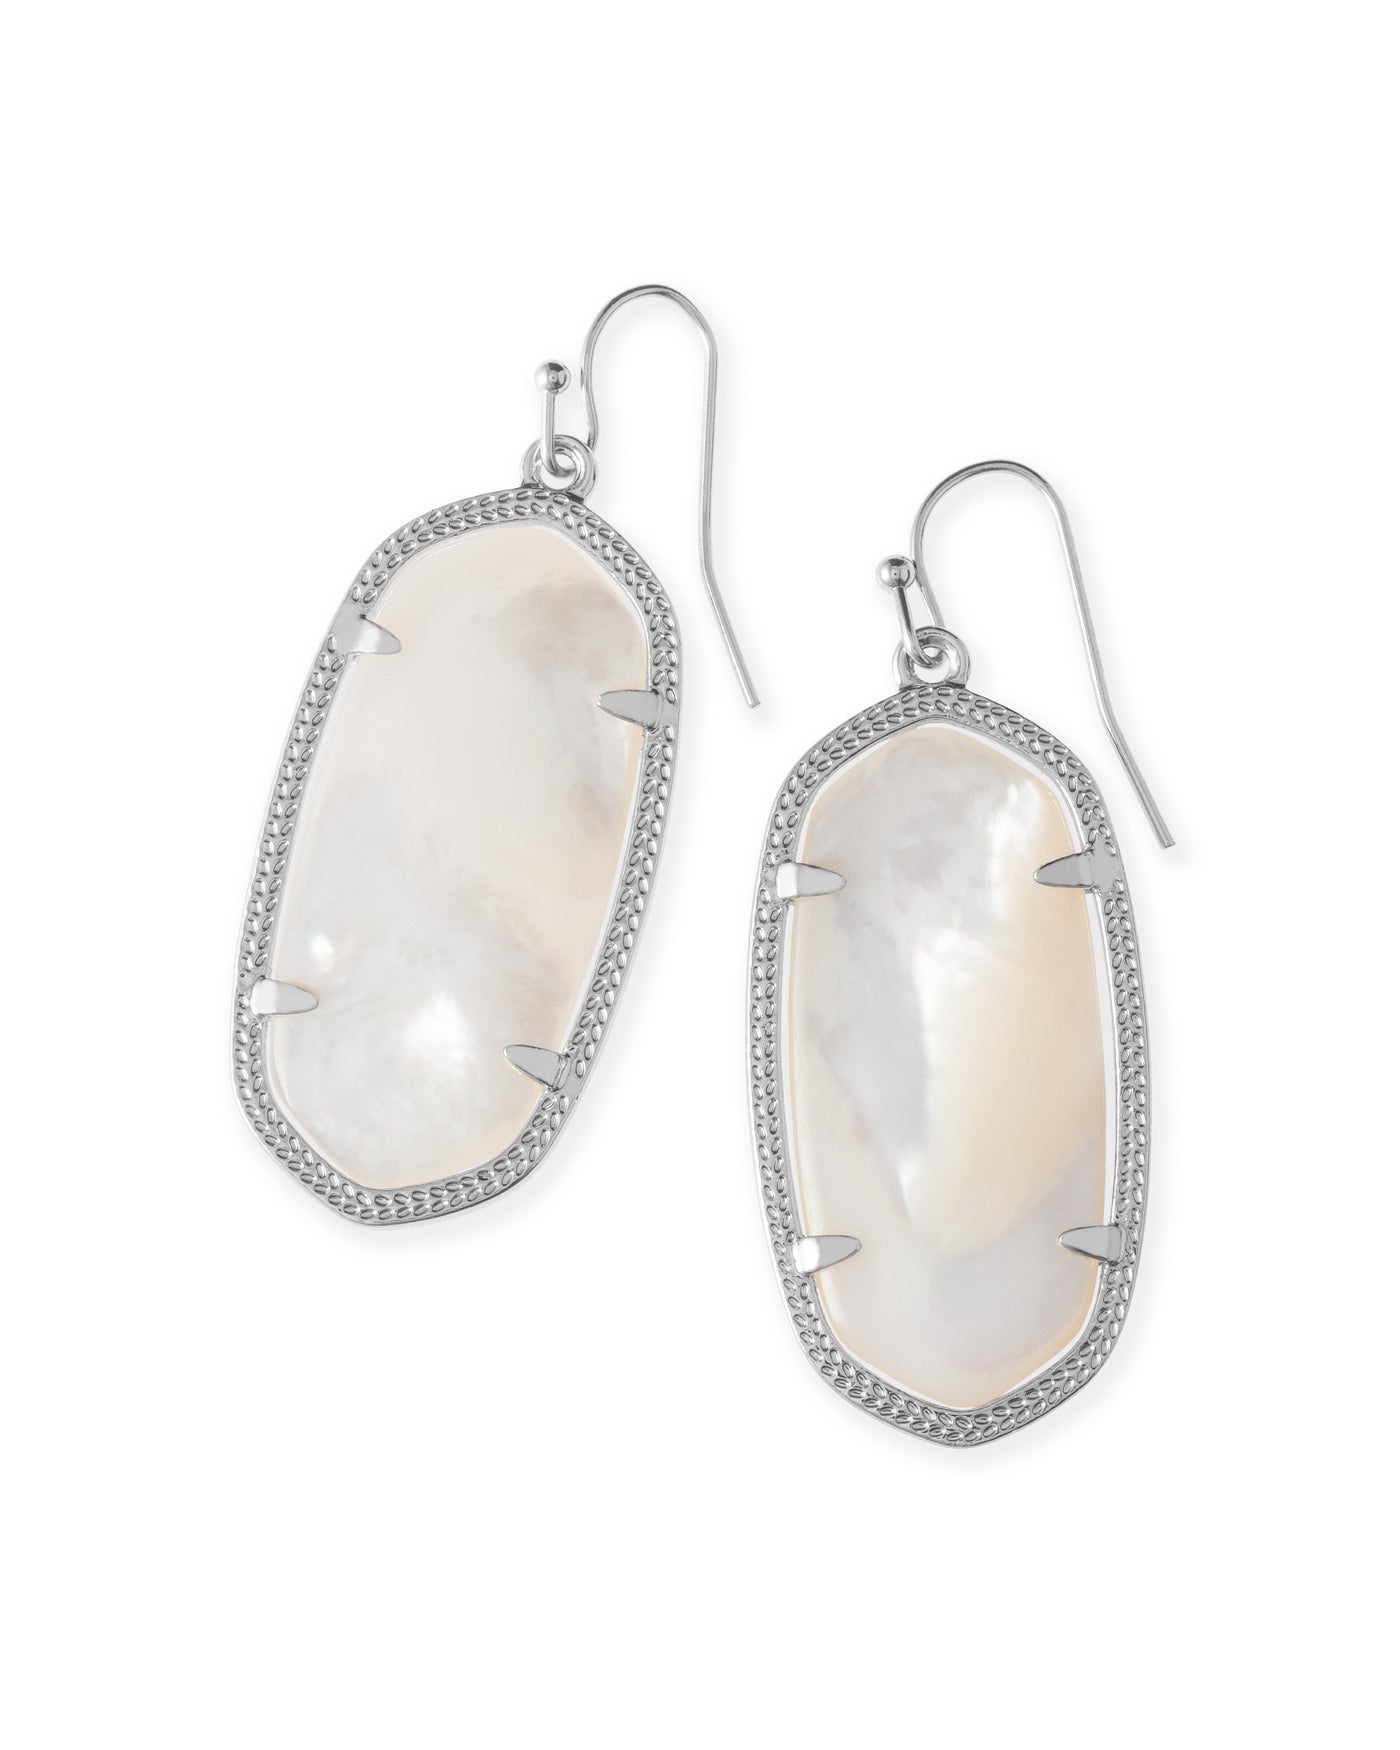 Kendra Scott Elle Silver Drop Earrings In Ivory Mother-Of-Pearl-Earrings-Kendra Scott-Market Street Nest, Fashionable Clothing, Shoes and Home Décor Located in Mabank, TX